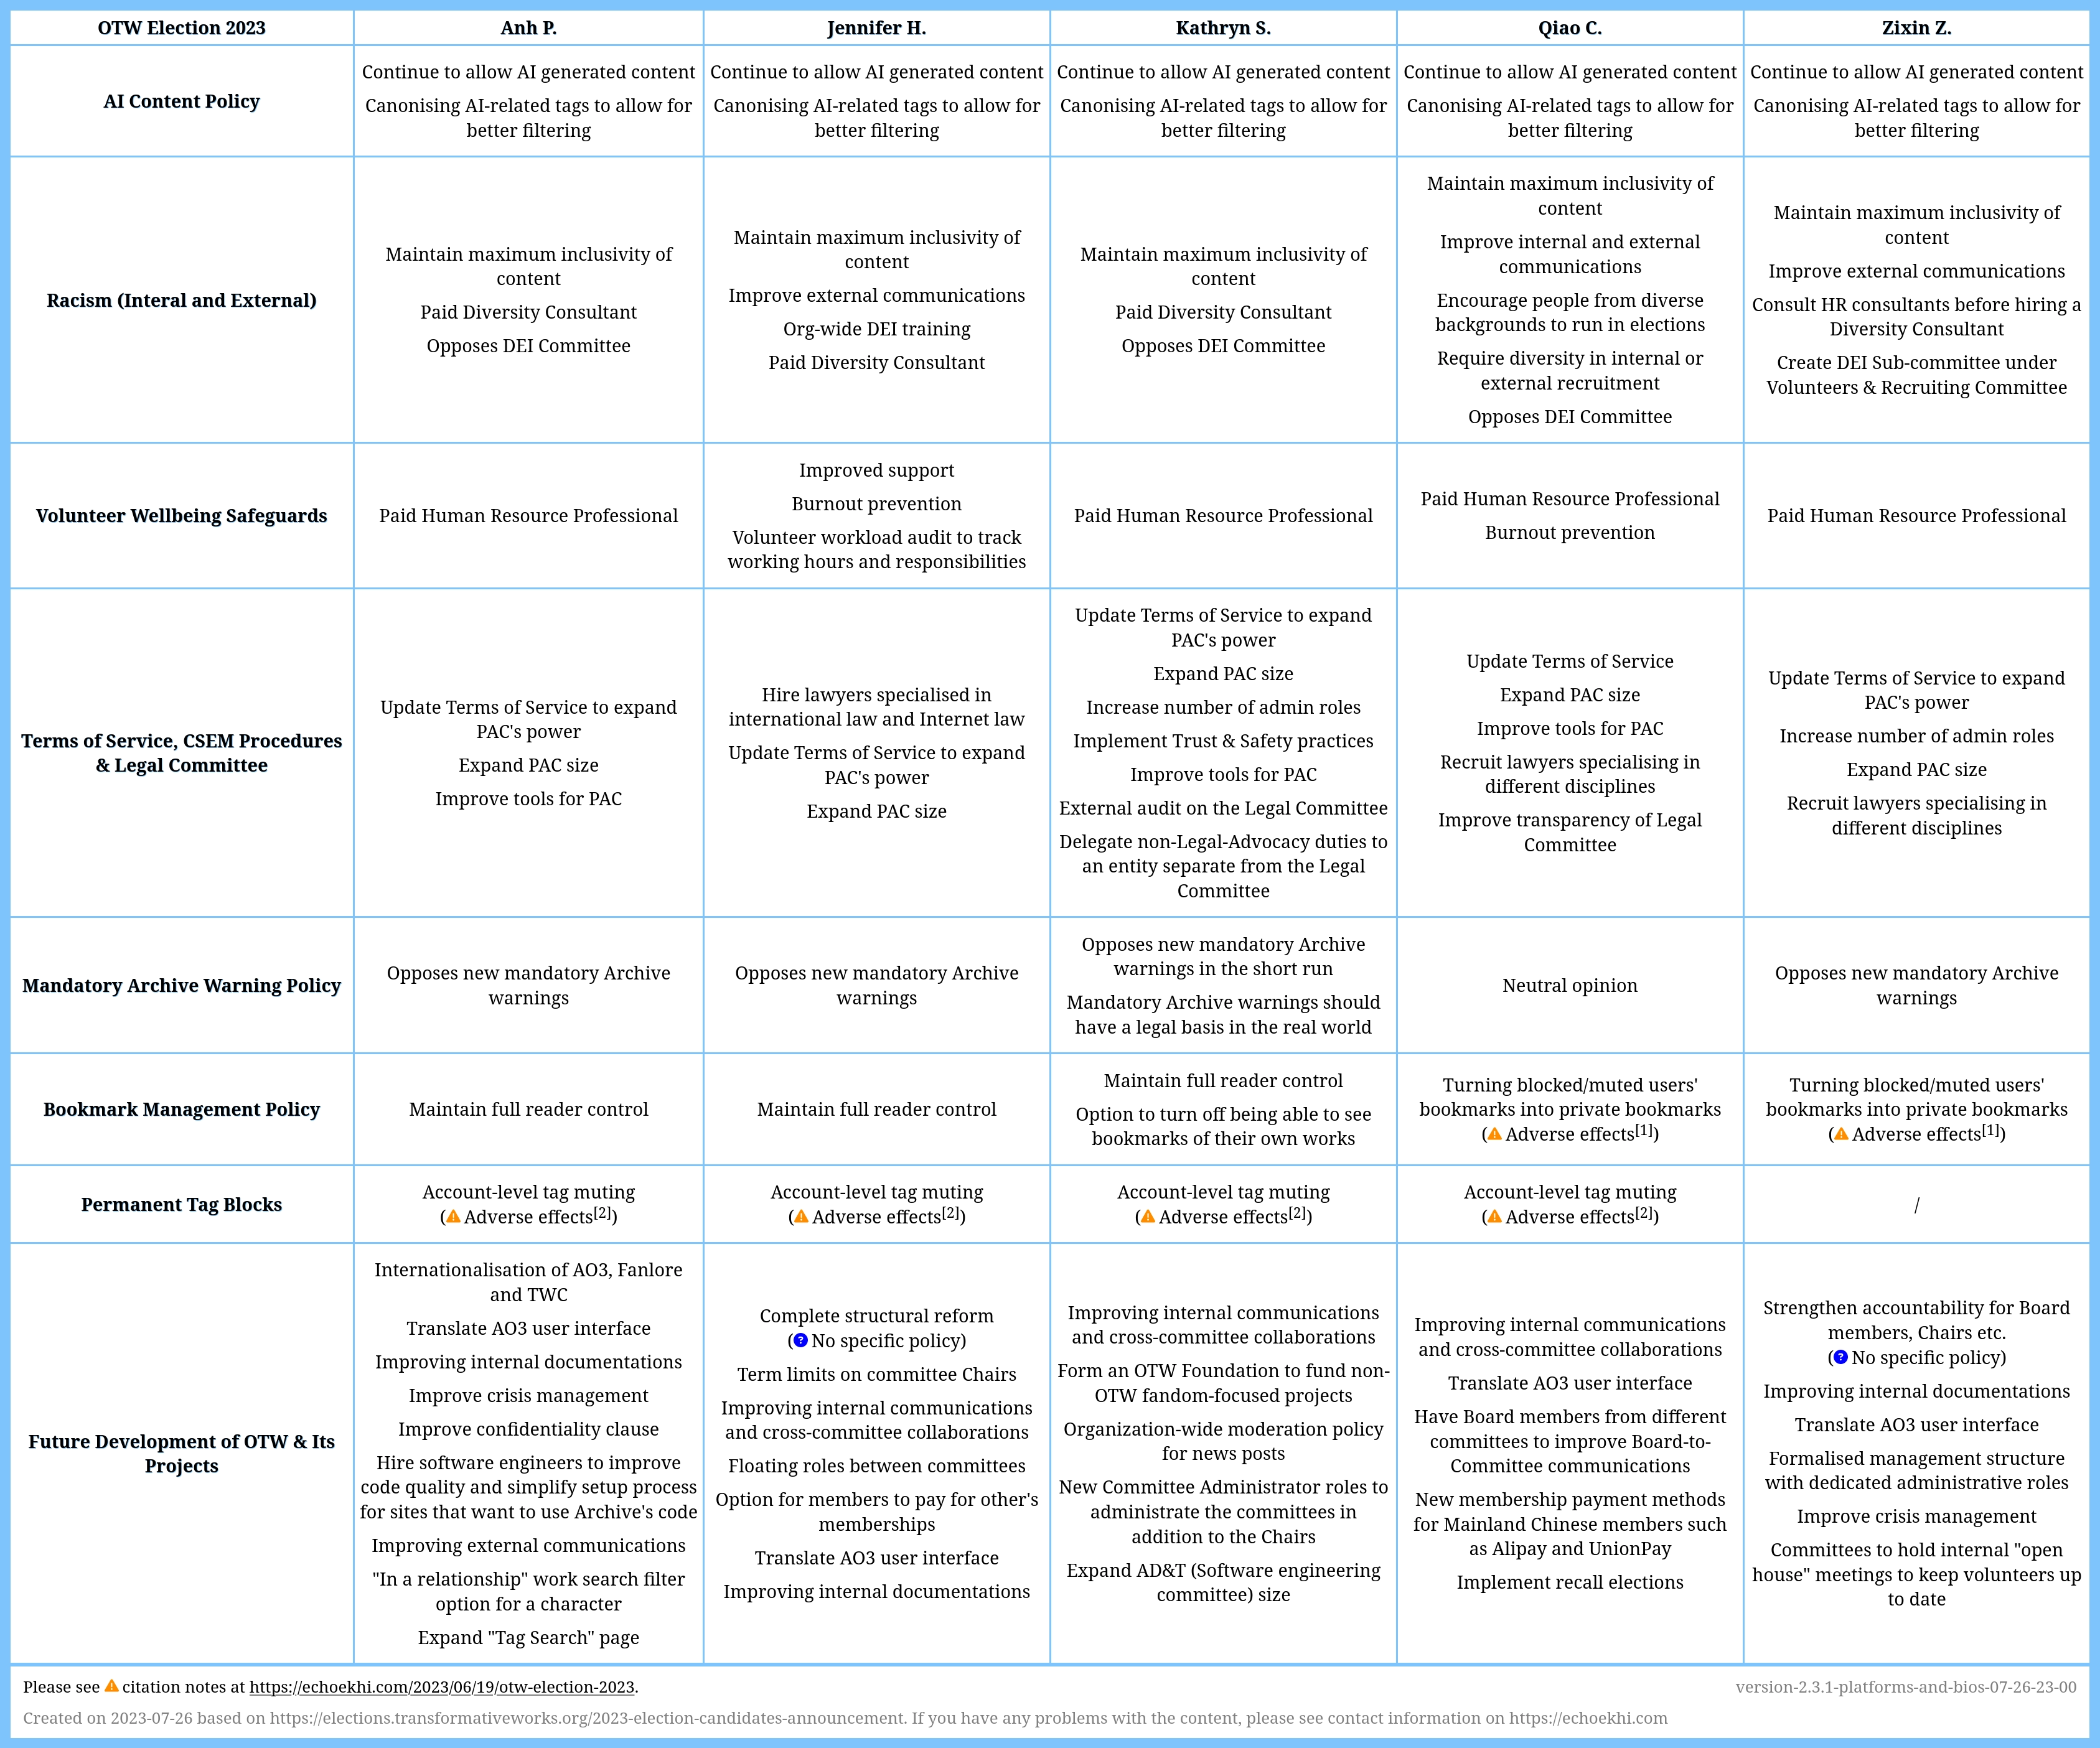 Very large table summarising candidates' policies and positions. Keep reading for link to alt text.